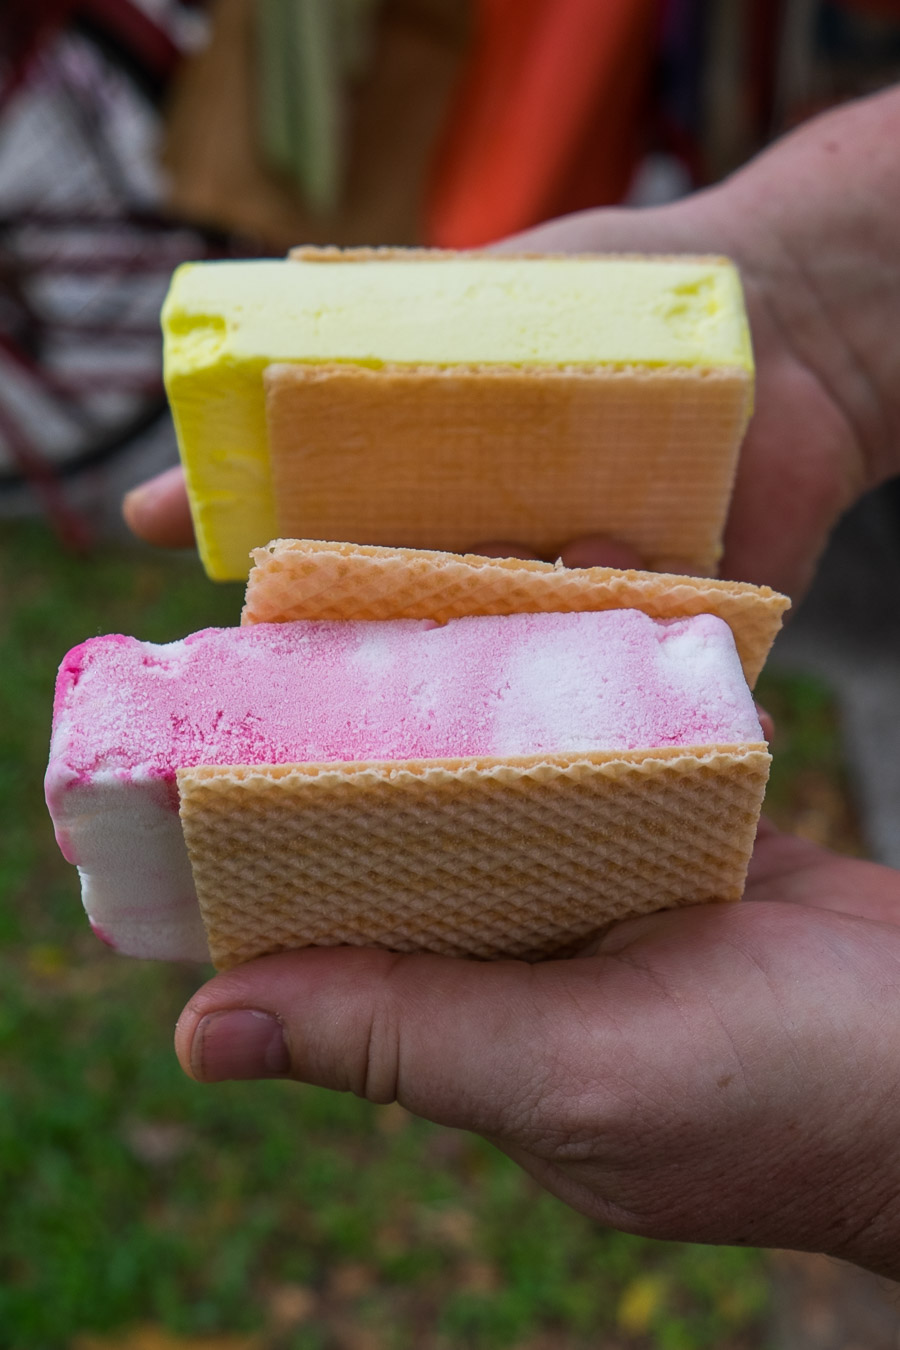 Raspberry ripple and durian wafers